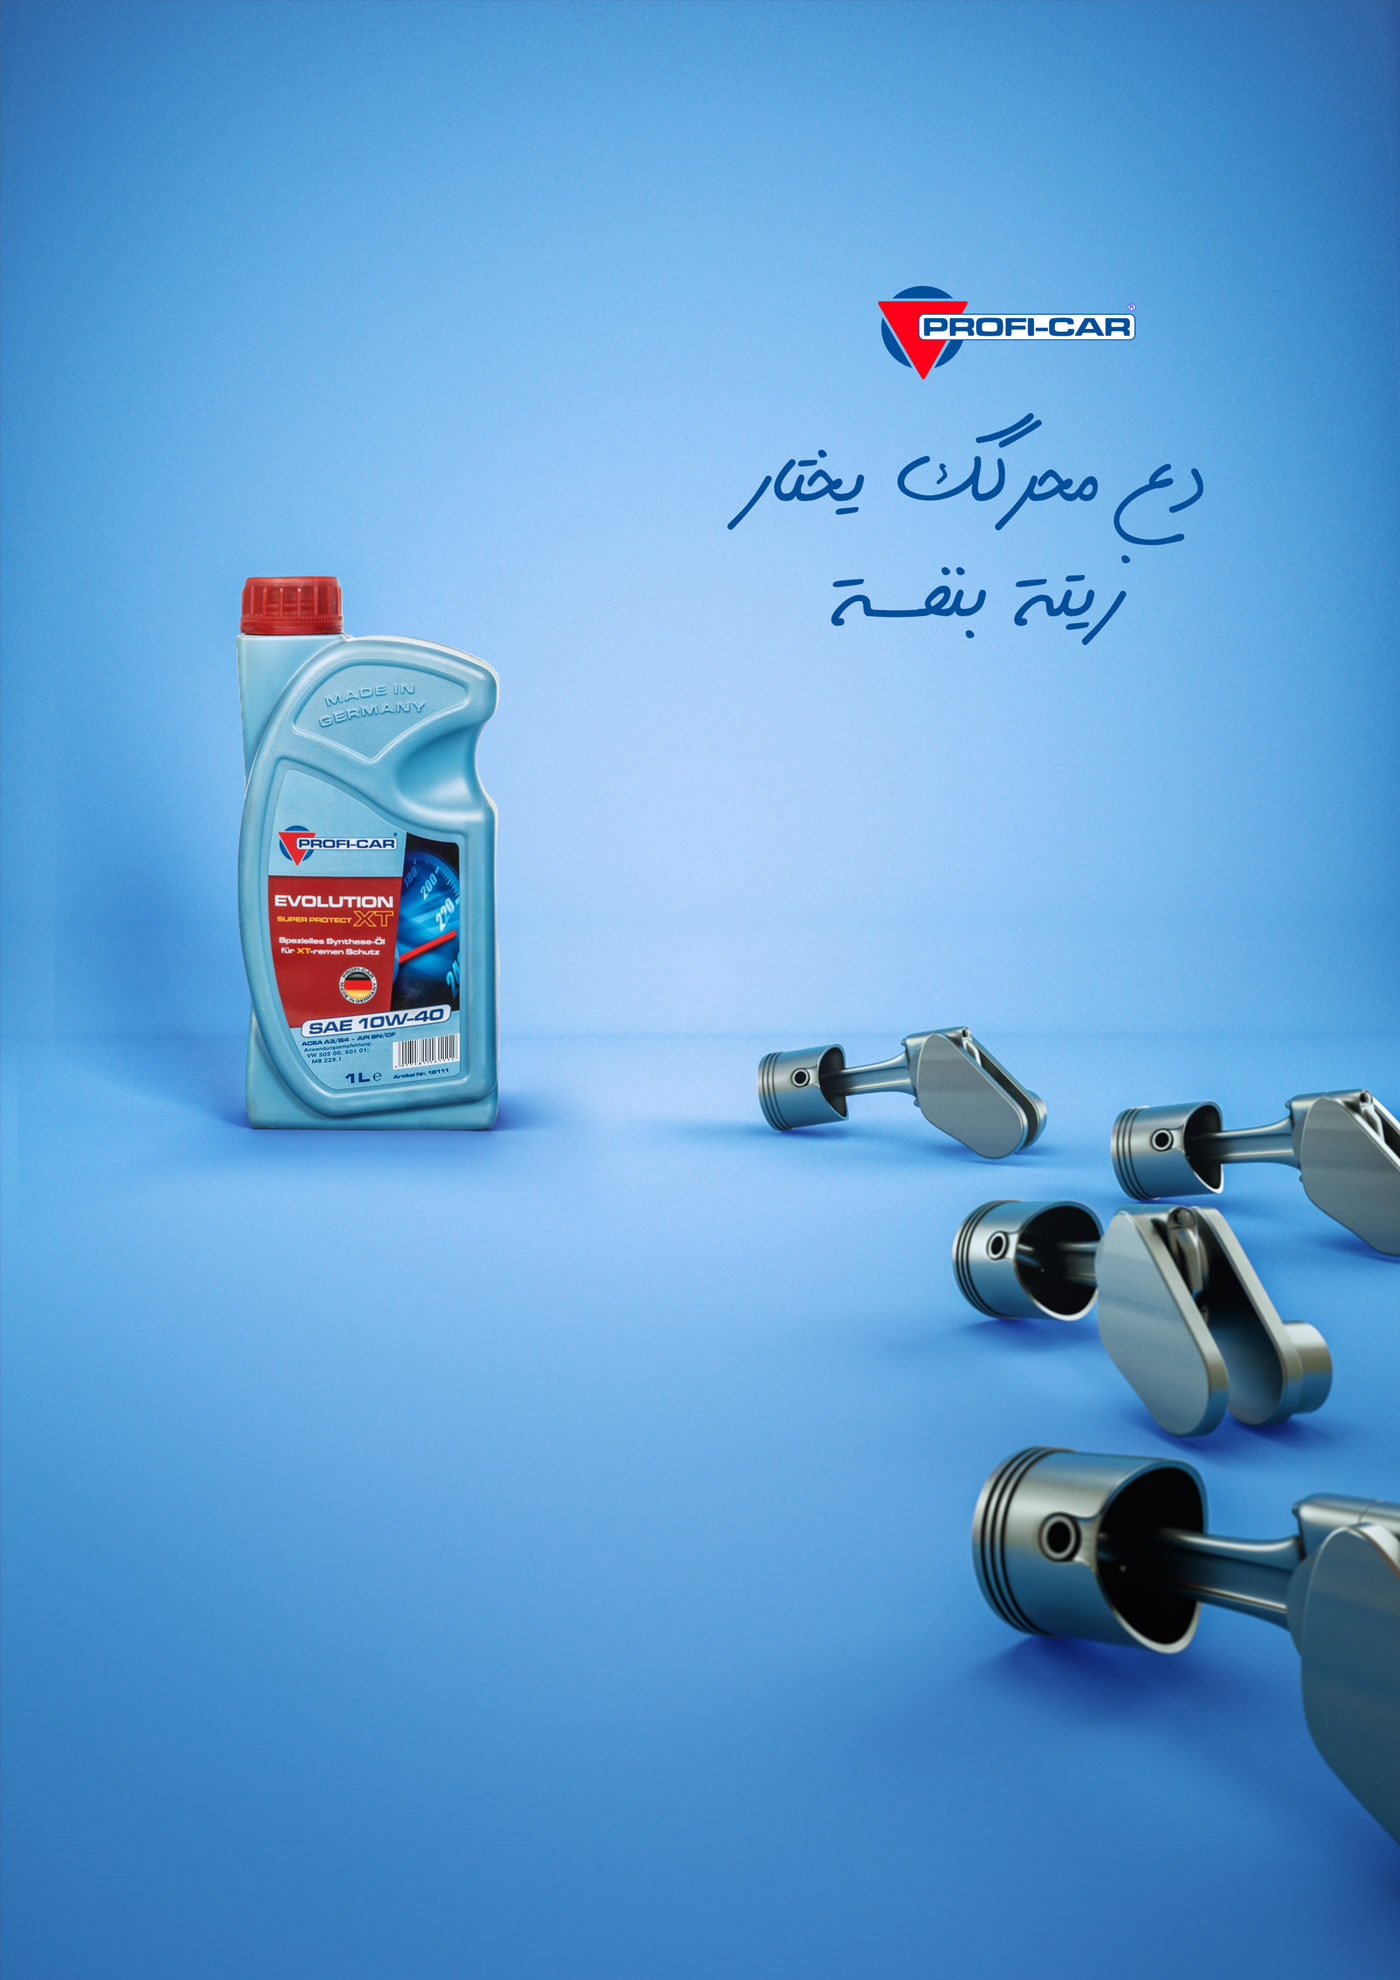 Engine Oil ads oil ads poster creative ads Oil creative ads 3d ads 3d Poster profi-car